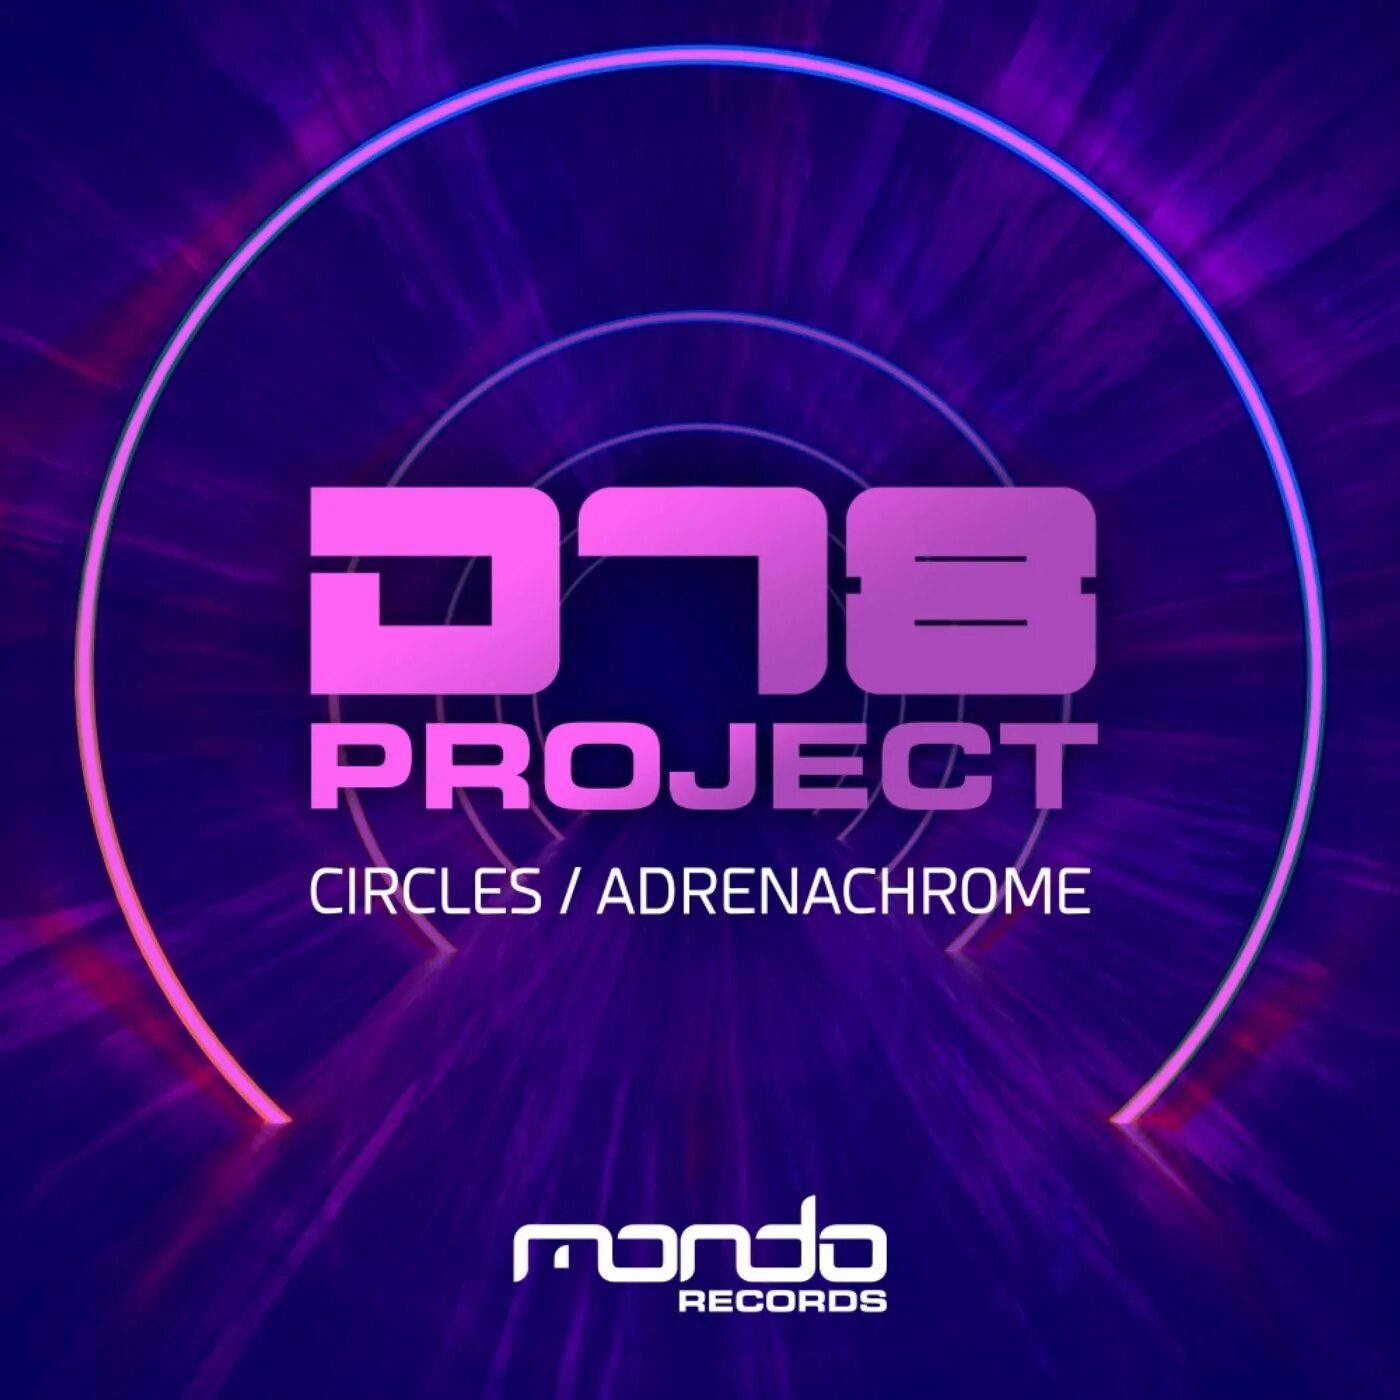 Project circle. Dt8 Project Breath. Dt8 Project — Forever (Extended Club Mix). Koguma Project circle. Adrenachrome